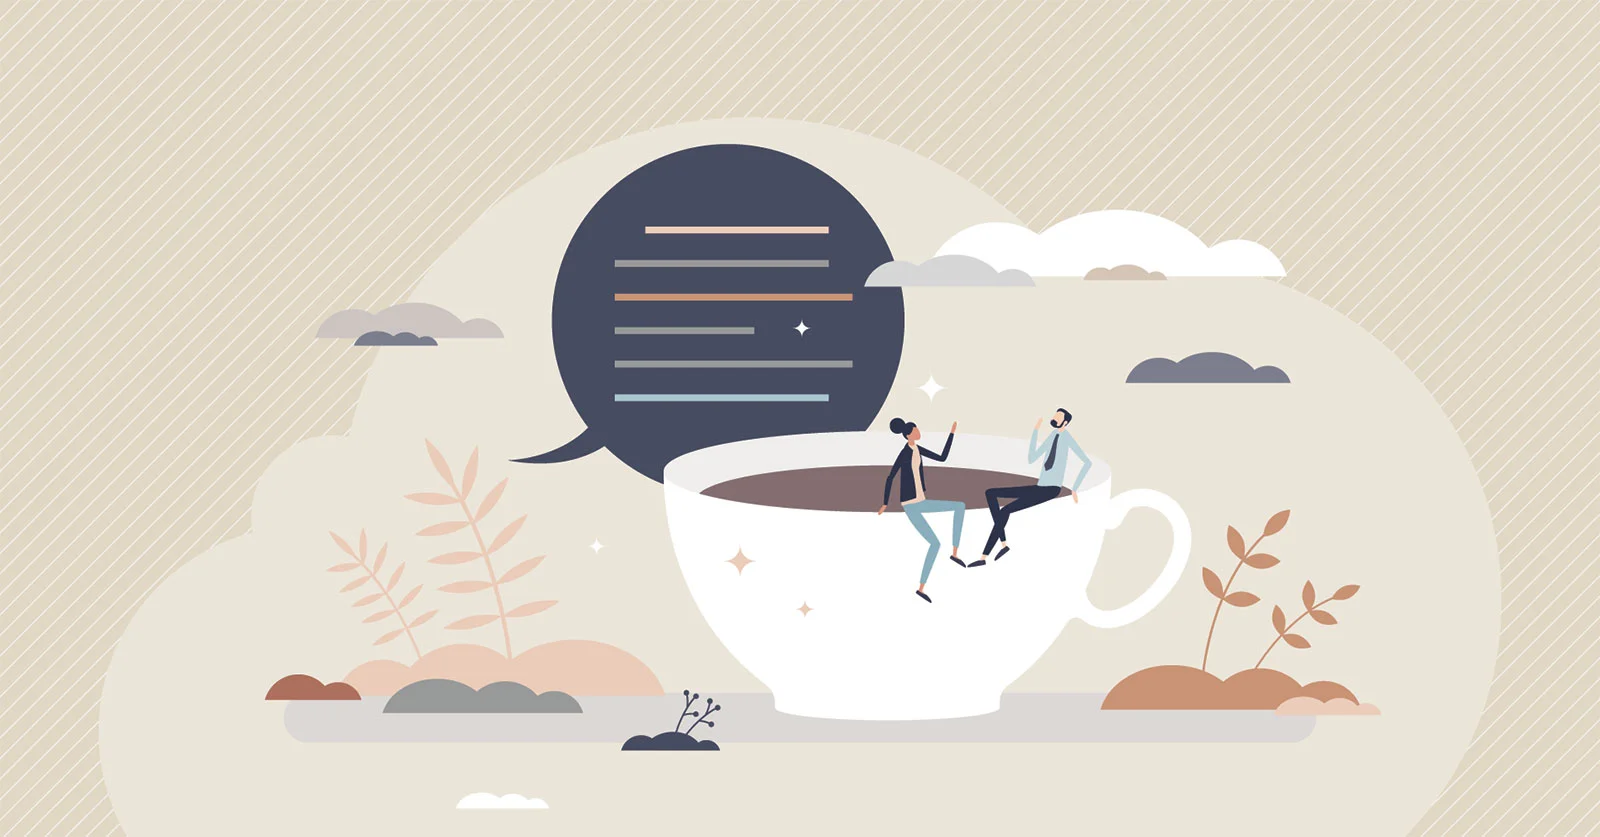 Cup of Coffee and Conversation Illustration